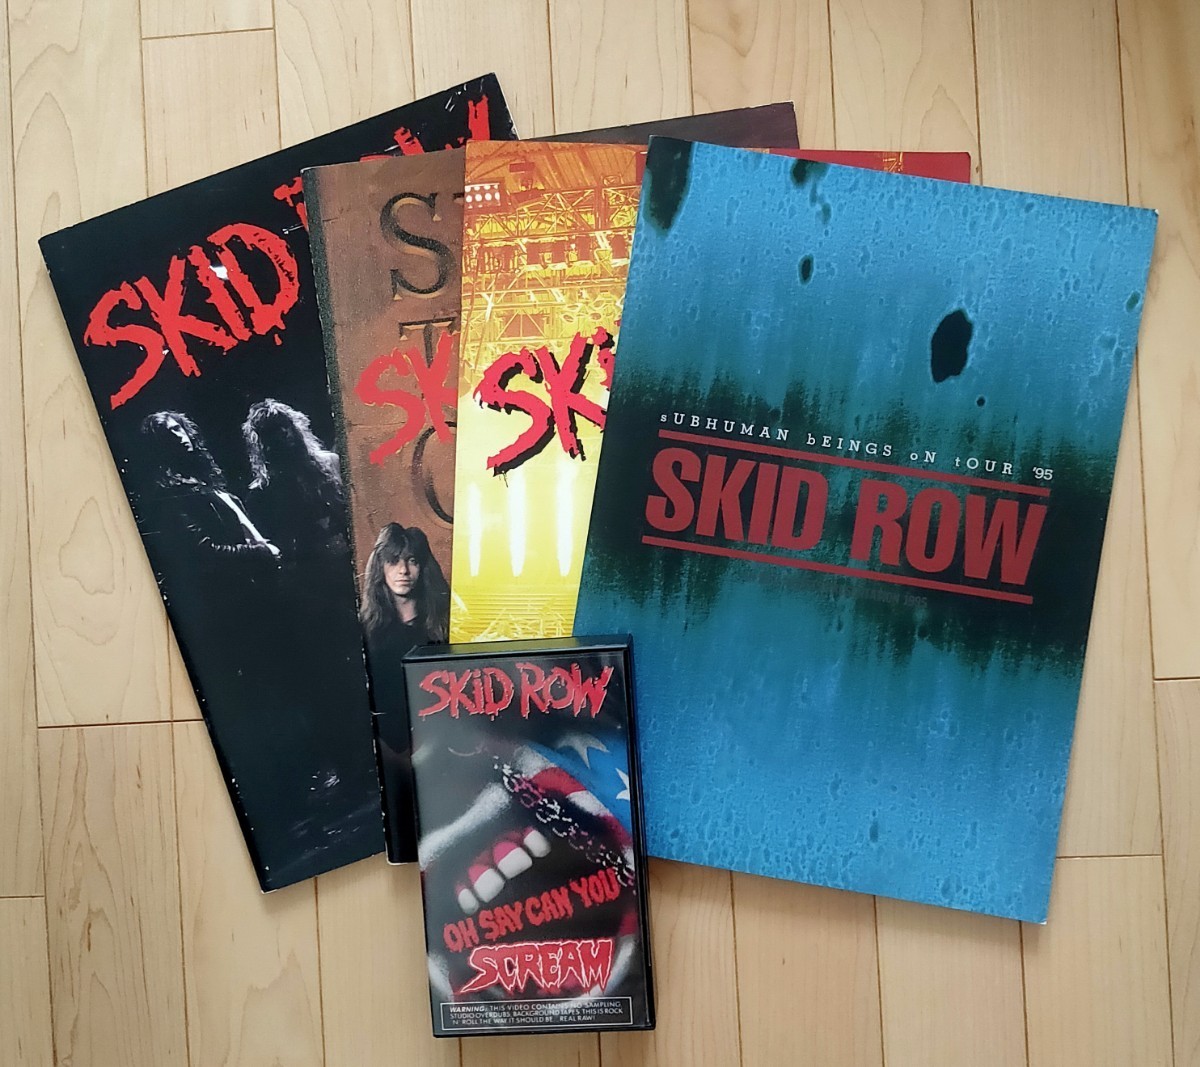 SKID ROW. day concert pamphlet skid low video Oh Say Can You Scream Videose bus tea n* back lock 